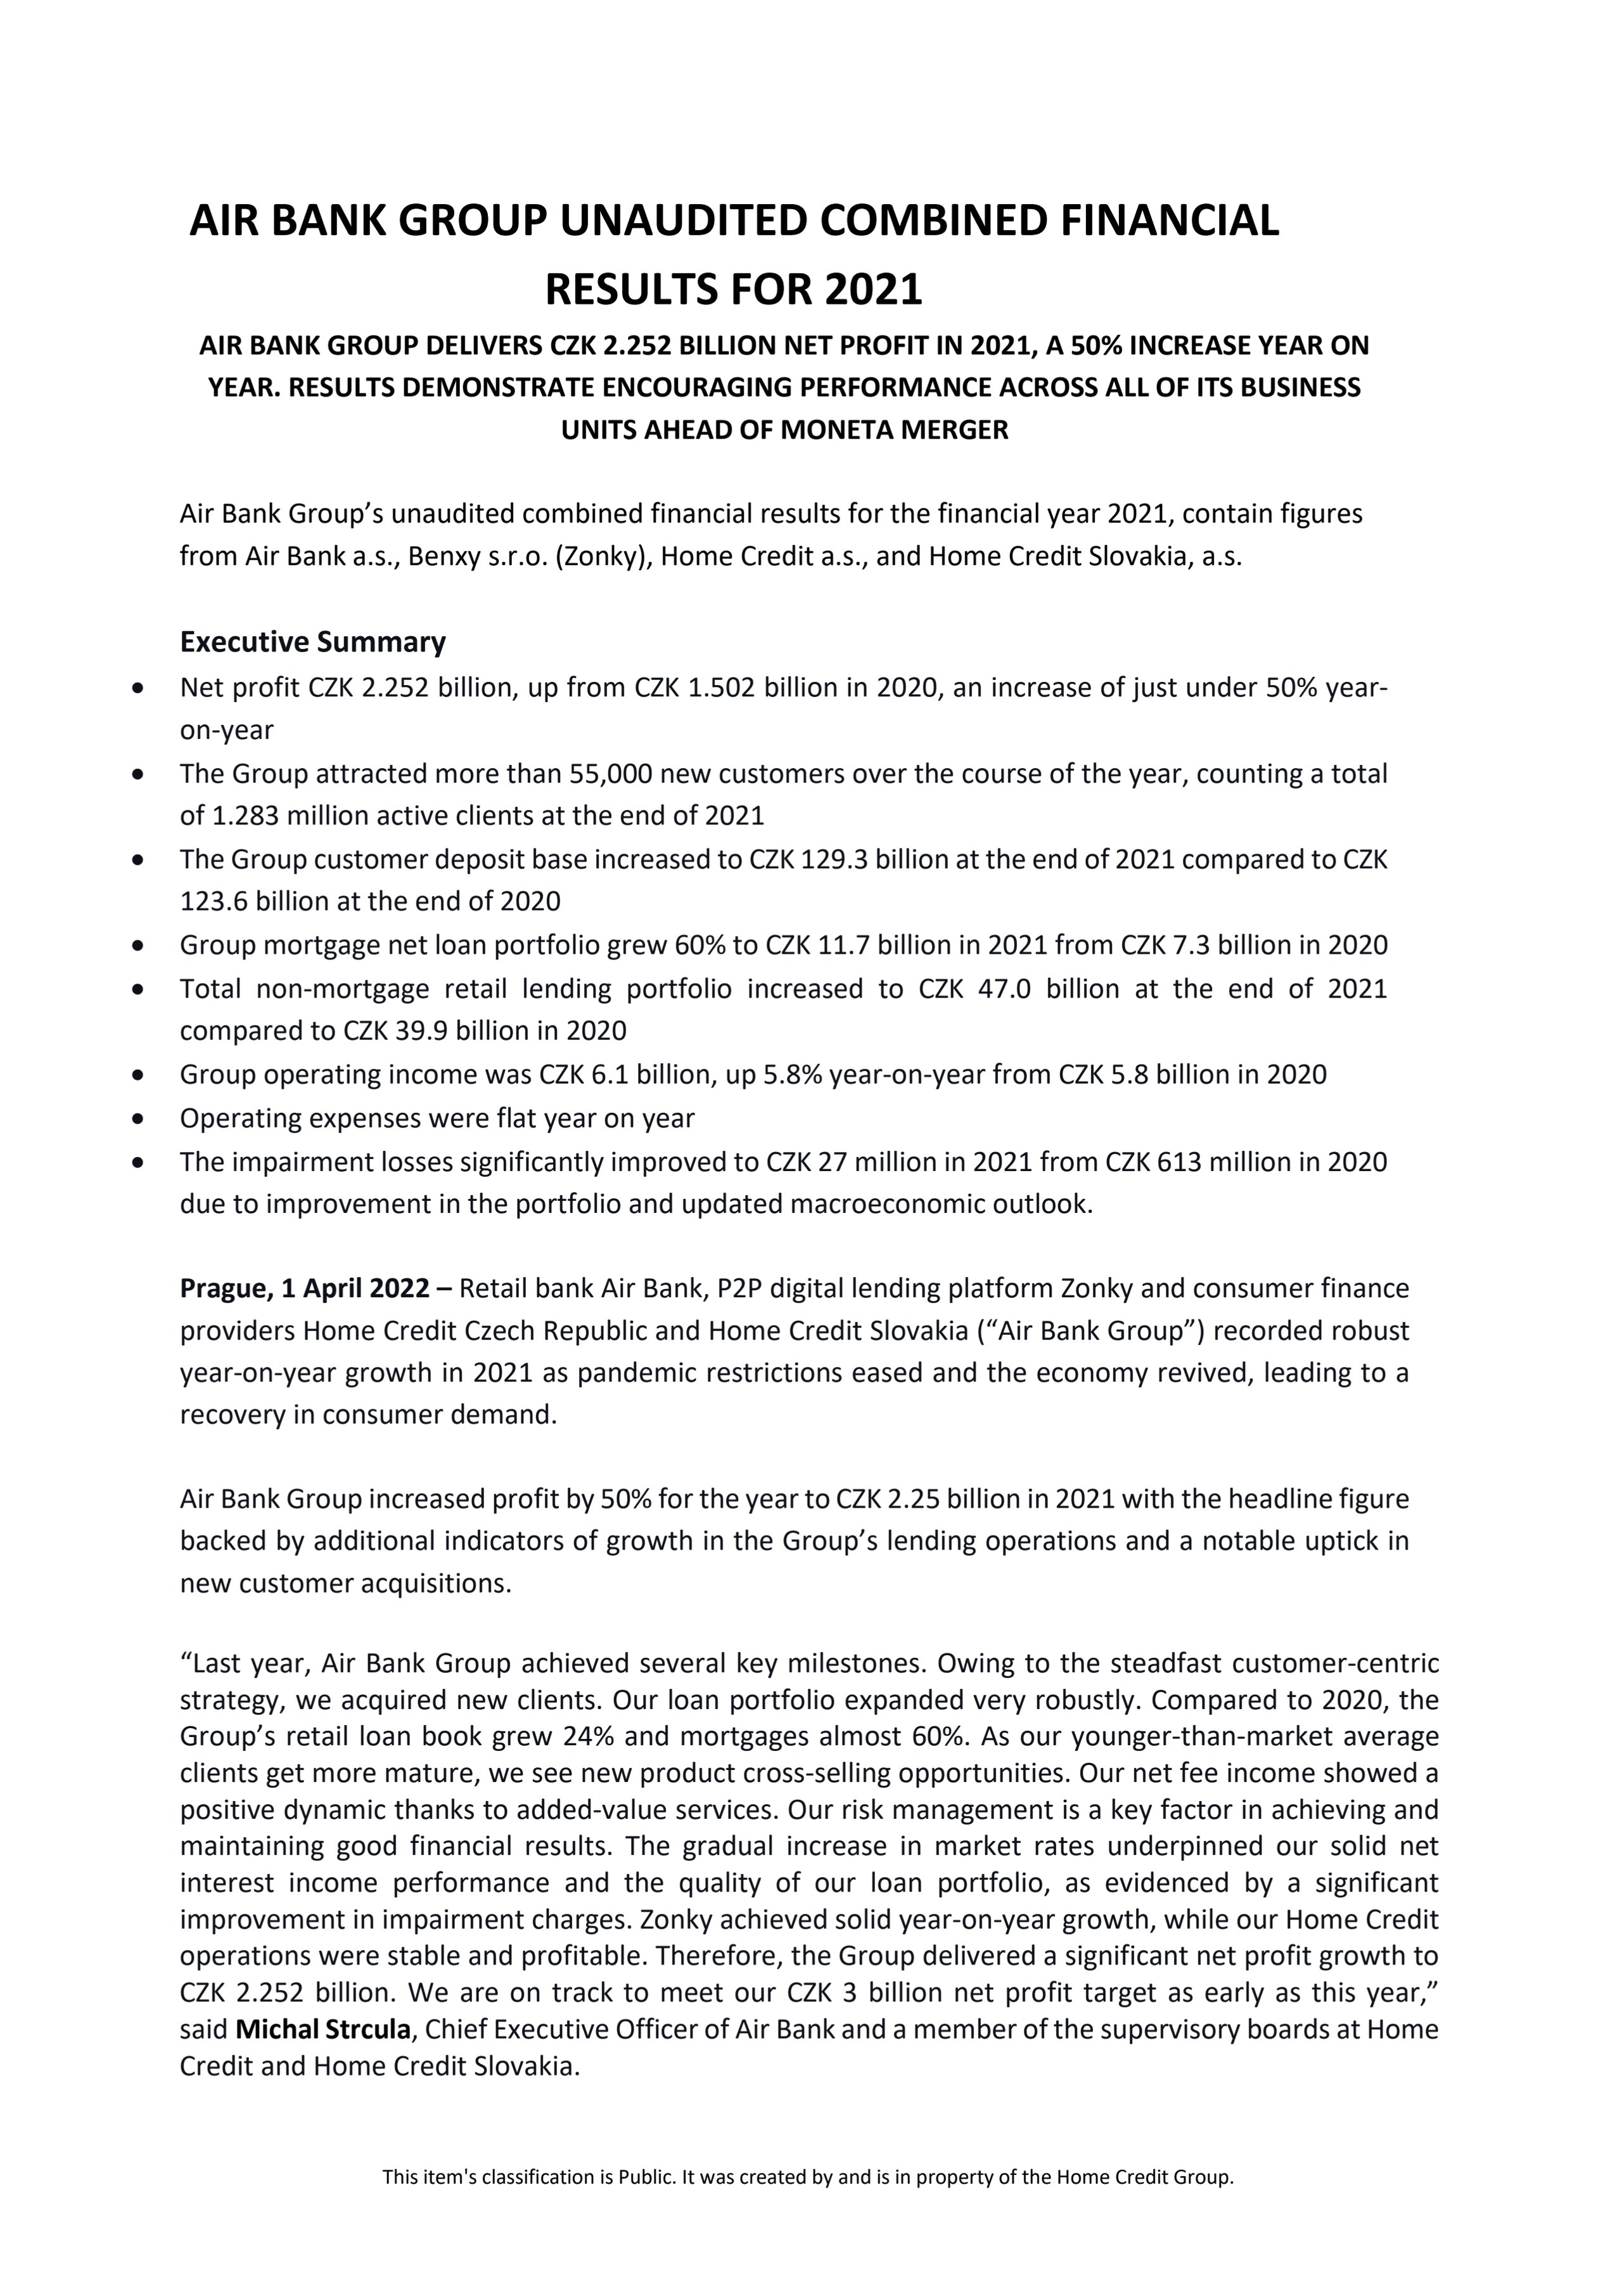 Air Bank Group FY 2021 combined unaudited results